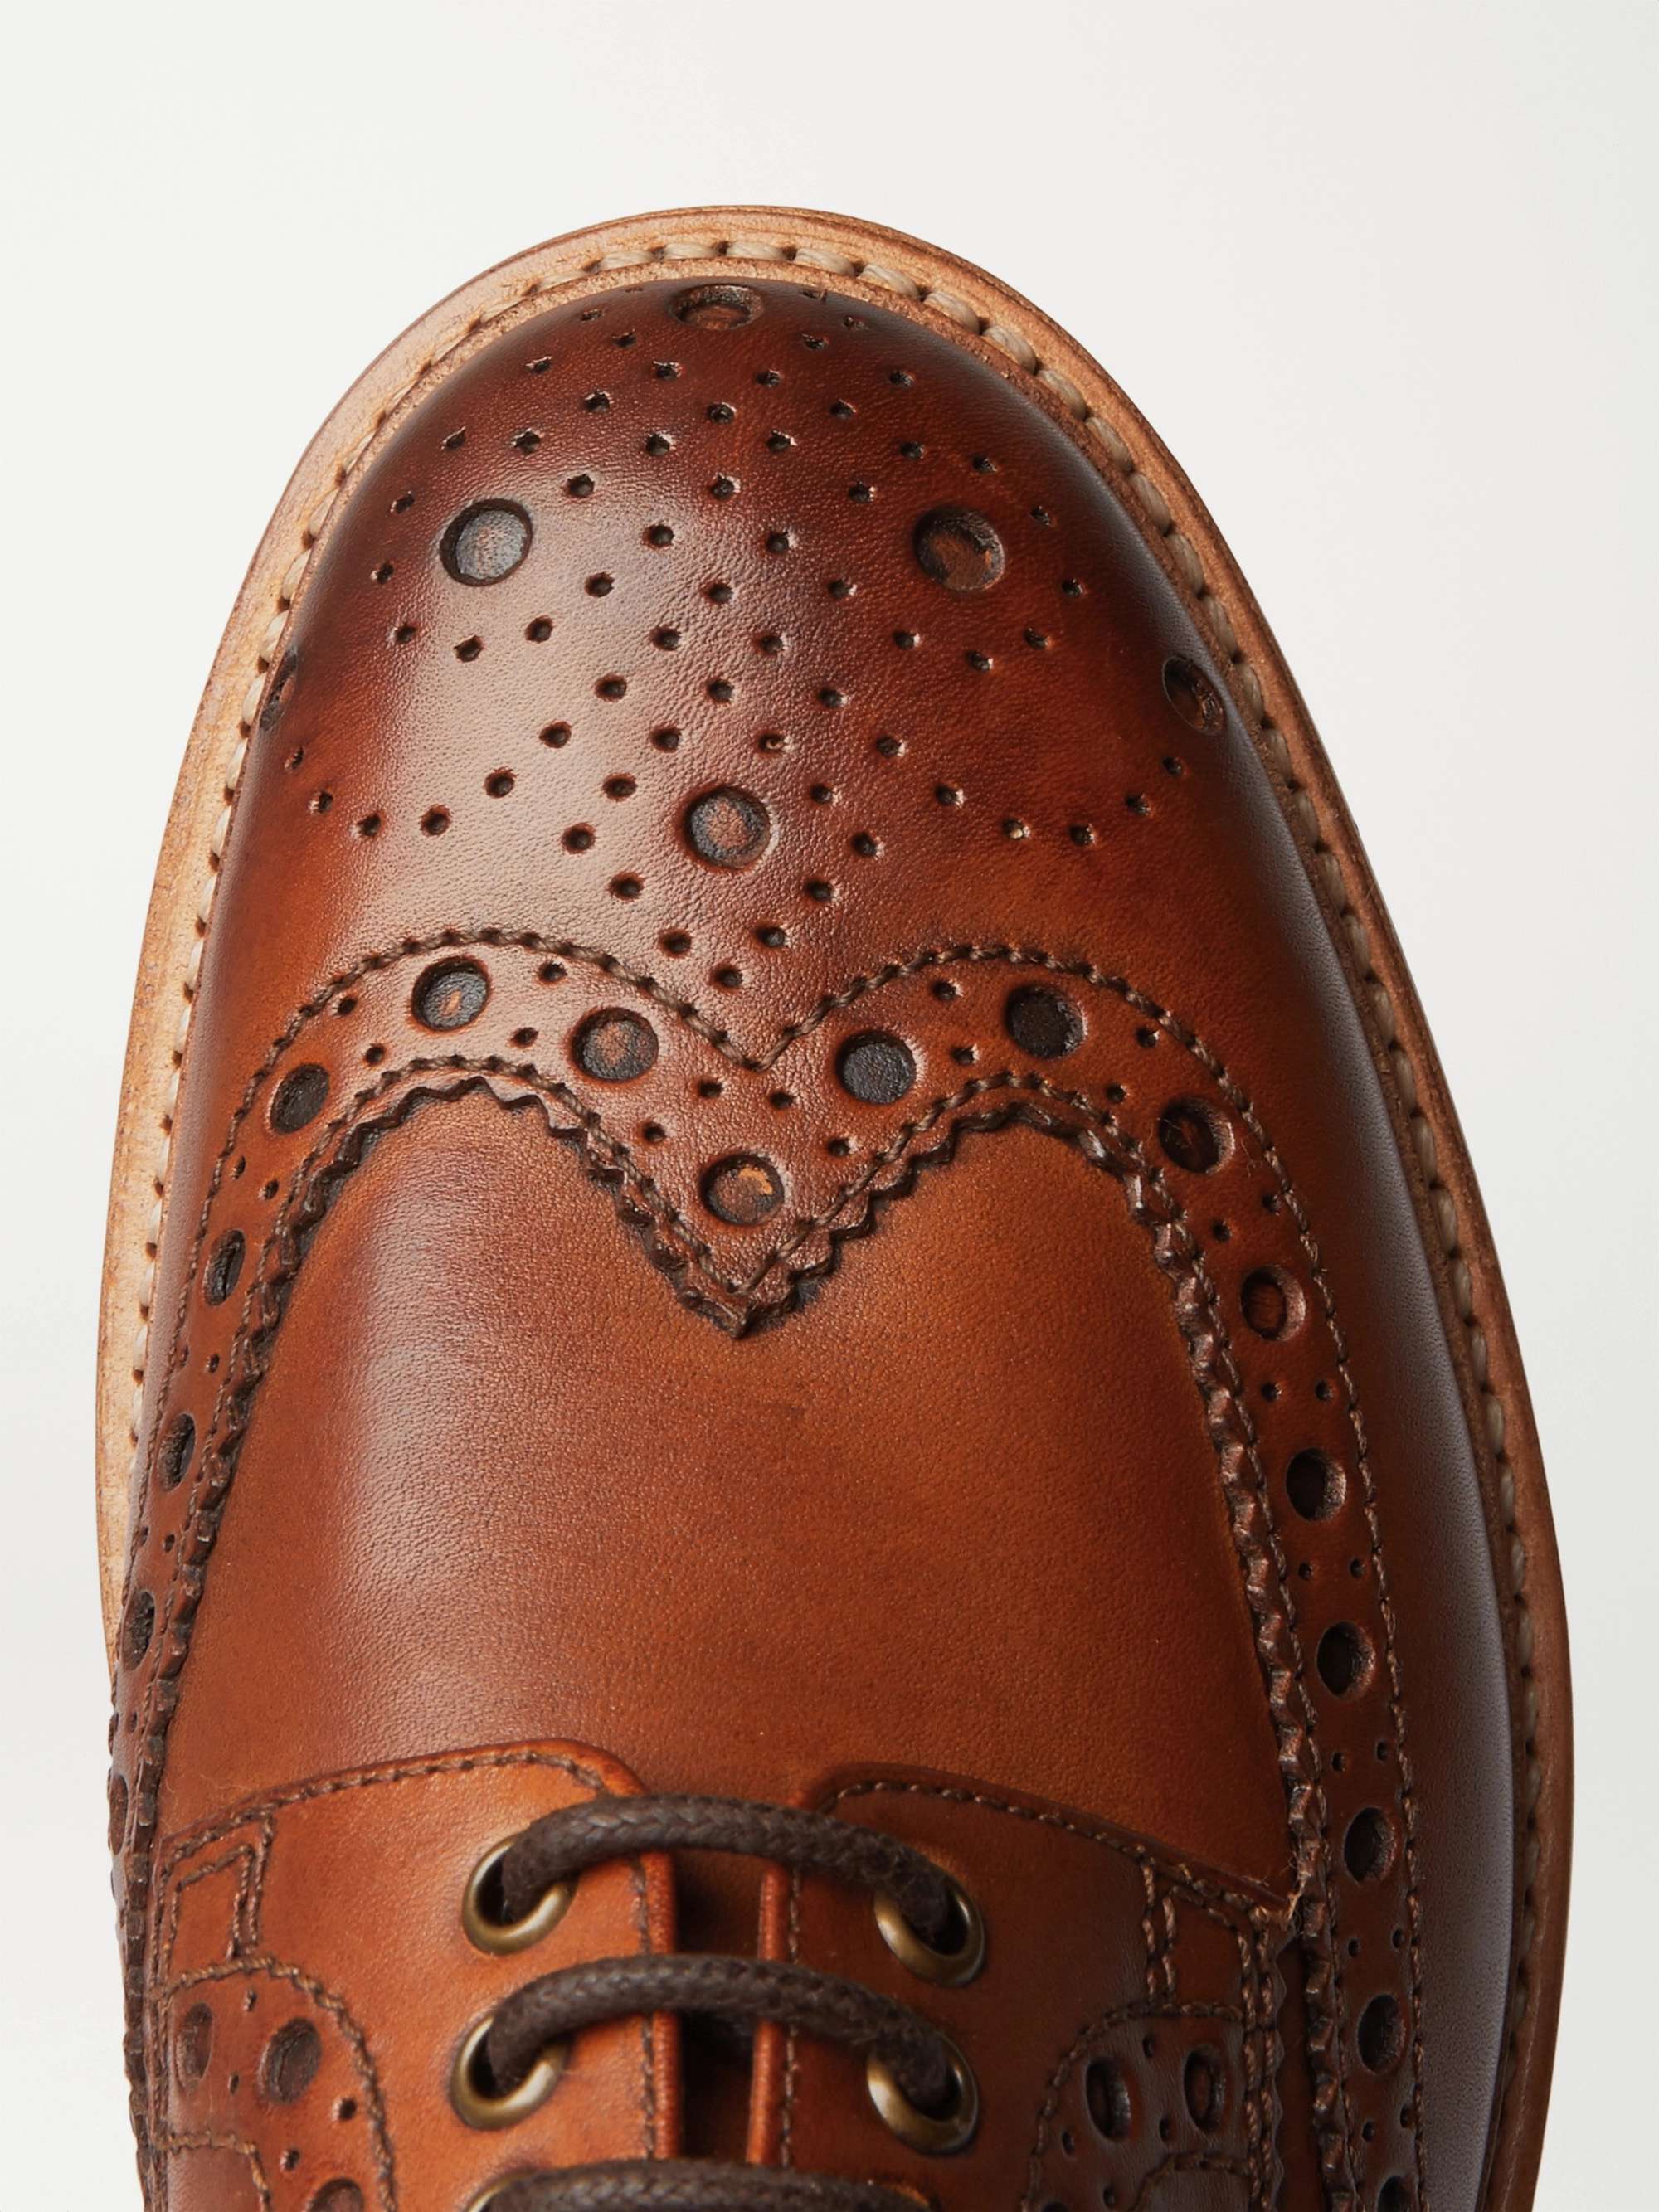 GRENSON Archie Leather Wingtip Brogues